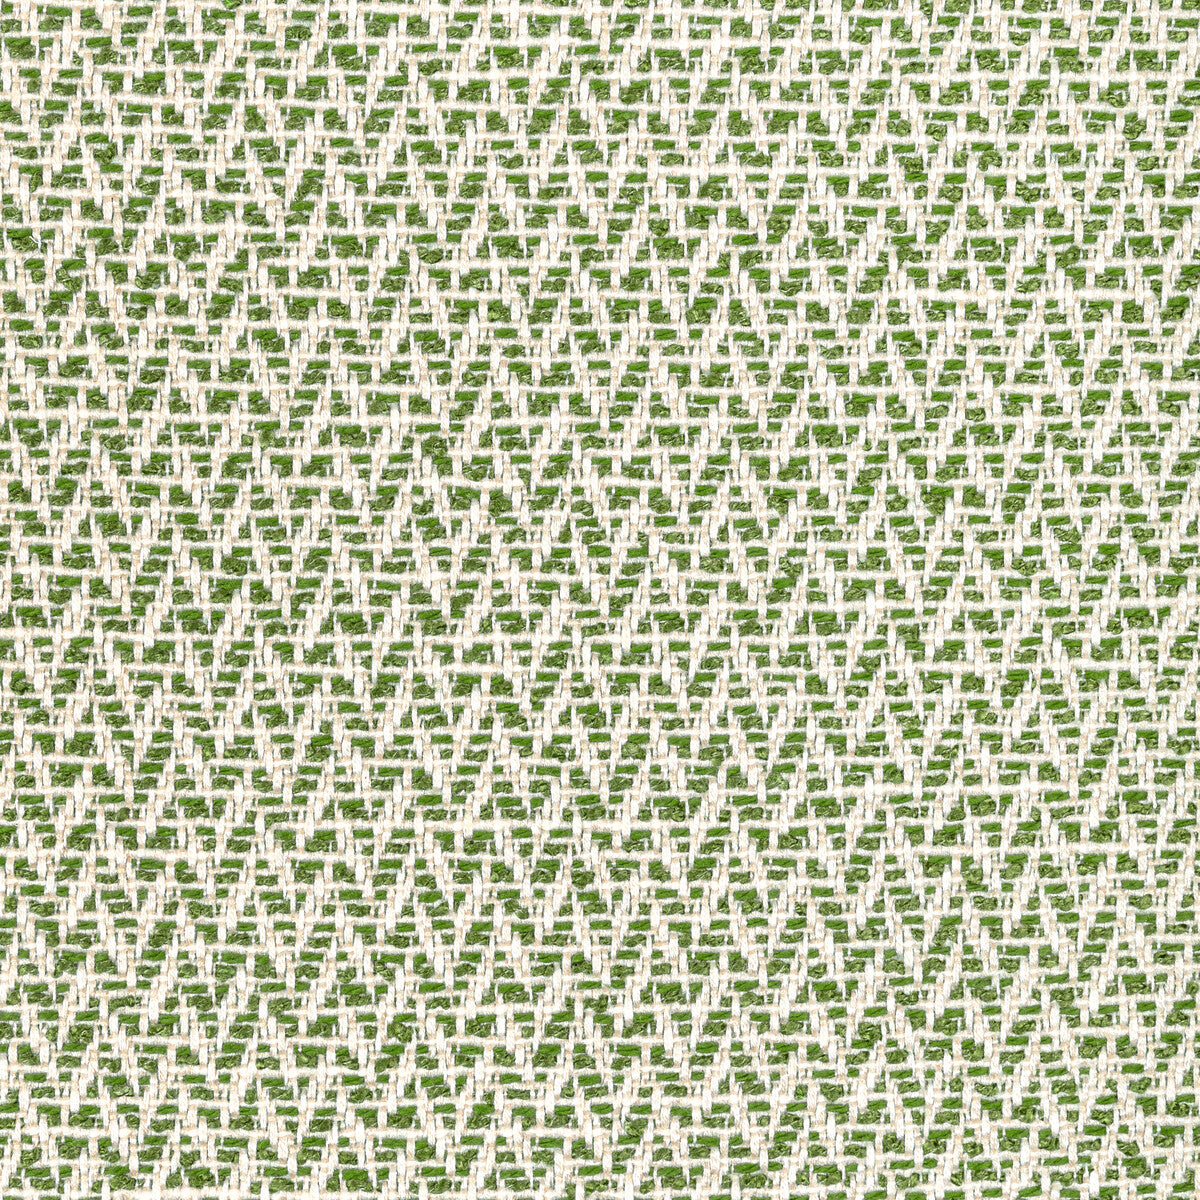 Kravet Design fabric in 36418-3 color - pattern 36418.3.0 - by Kravet Design in the Performance Crypton Home collection